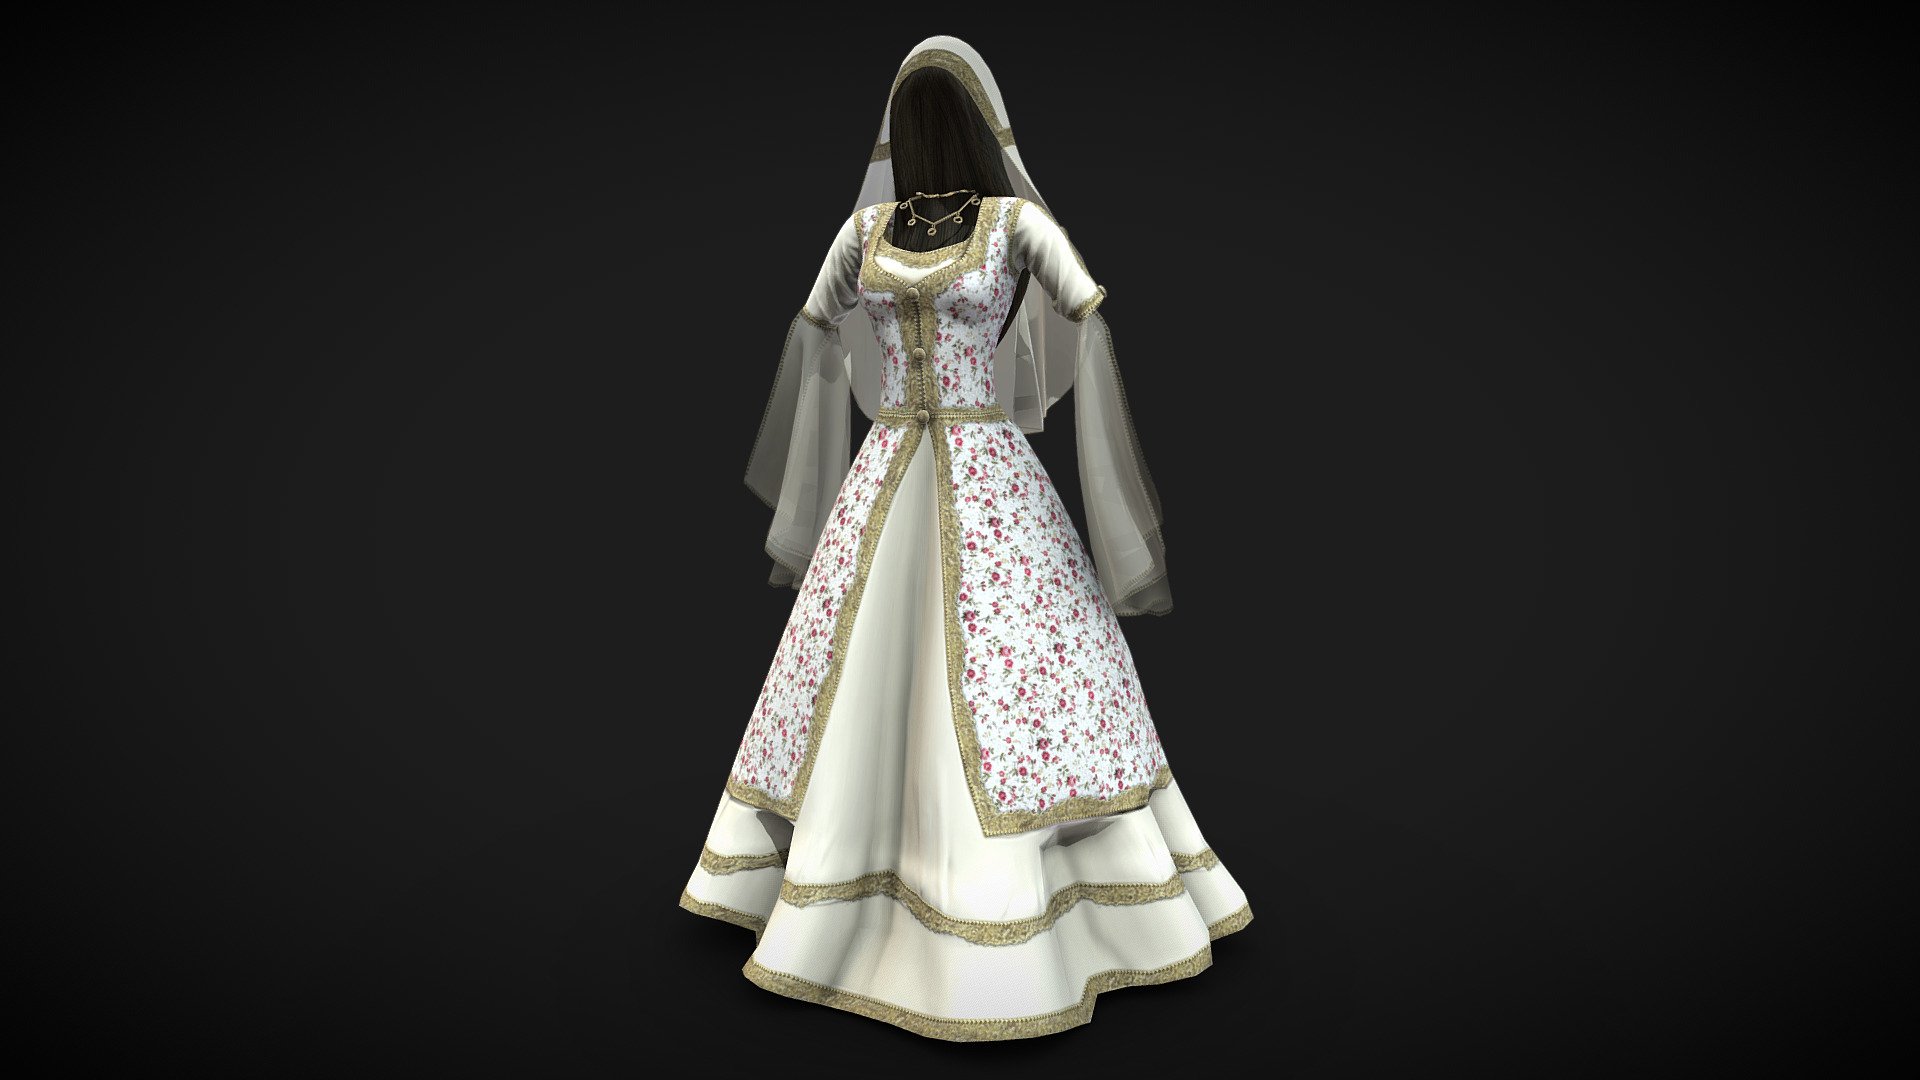 Dress, Hair and Veil, Necklace are separate objects

Can fit to any character

Ready for games

Clean topology

No overlapping unwrapped UVs

High quality realistic textues

FBX, OBJ, gITF, USDZ, Ma, PSD (request other formats)

PBR or Classic

Please ask for any other questions

Type     user:3dia &ldquo;search term